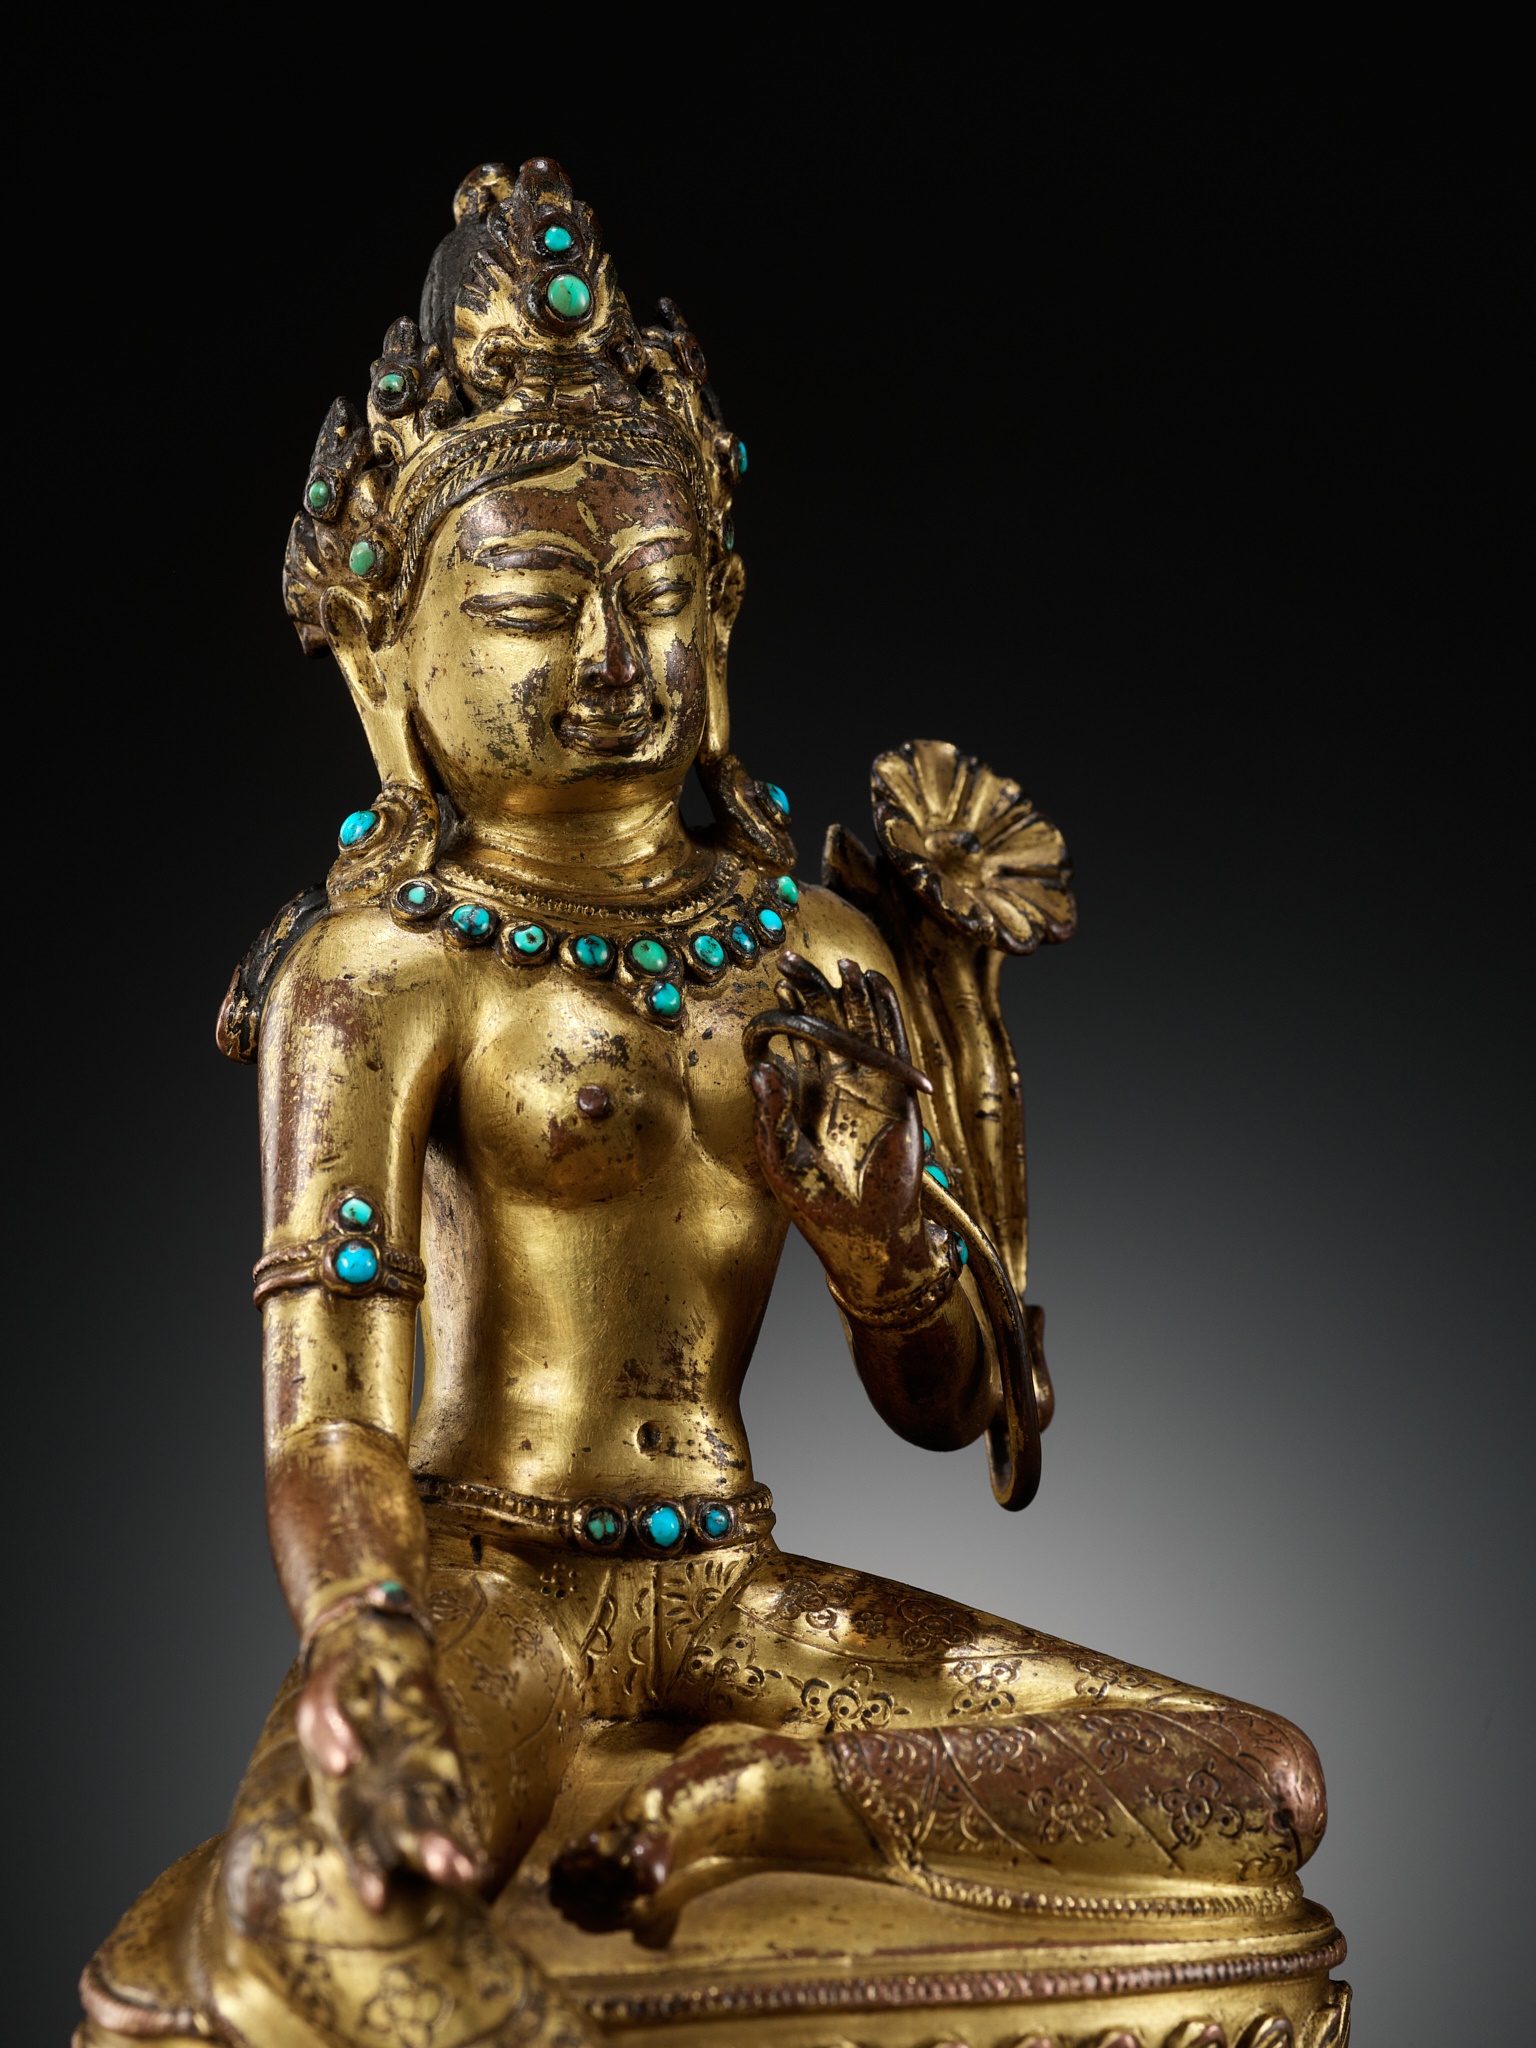 A GILT AND TURQUOISE-INLAID COPPER ALLOY FIGURE OF GREEN TARA, DENSATIL STYLE, TIBET, 14TH CENTURY - Image 3 of 16